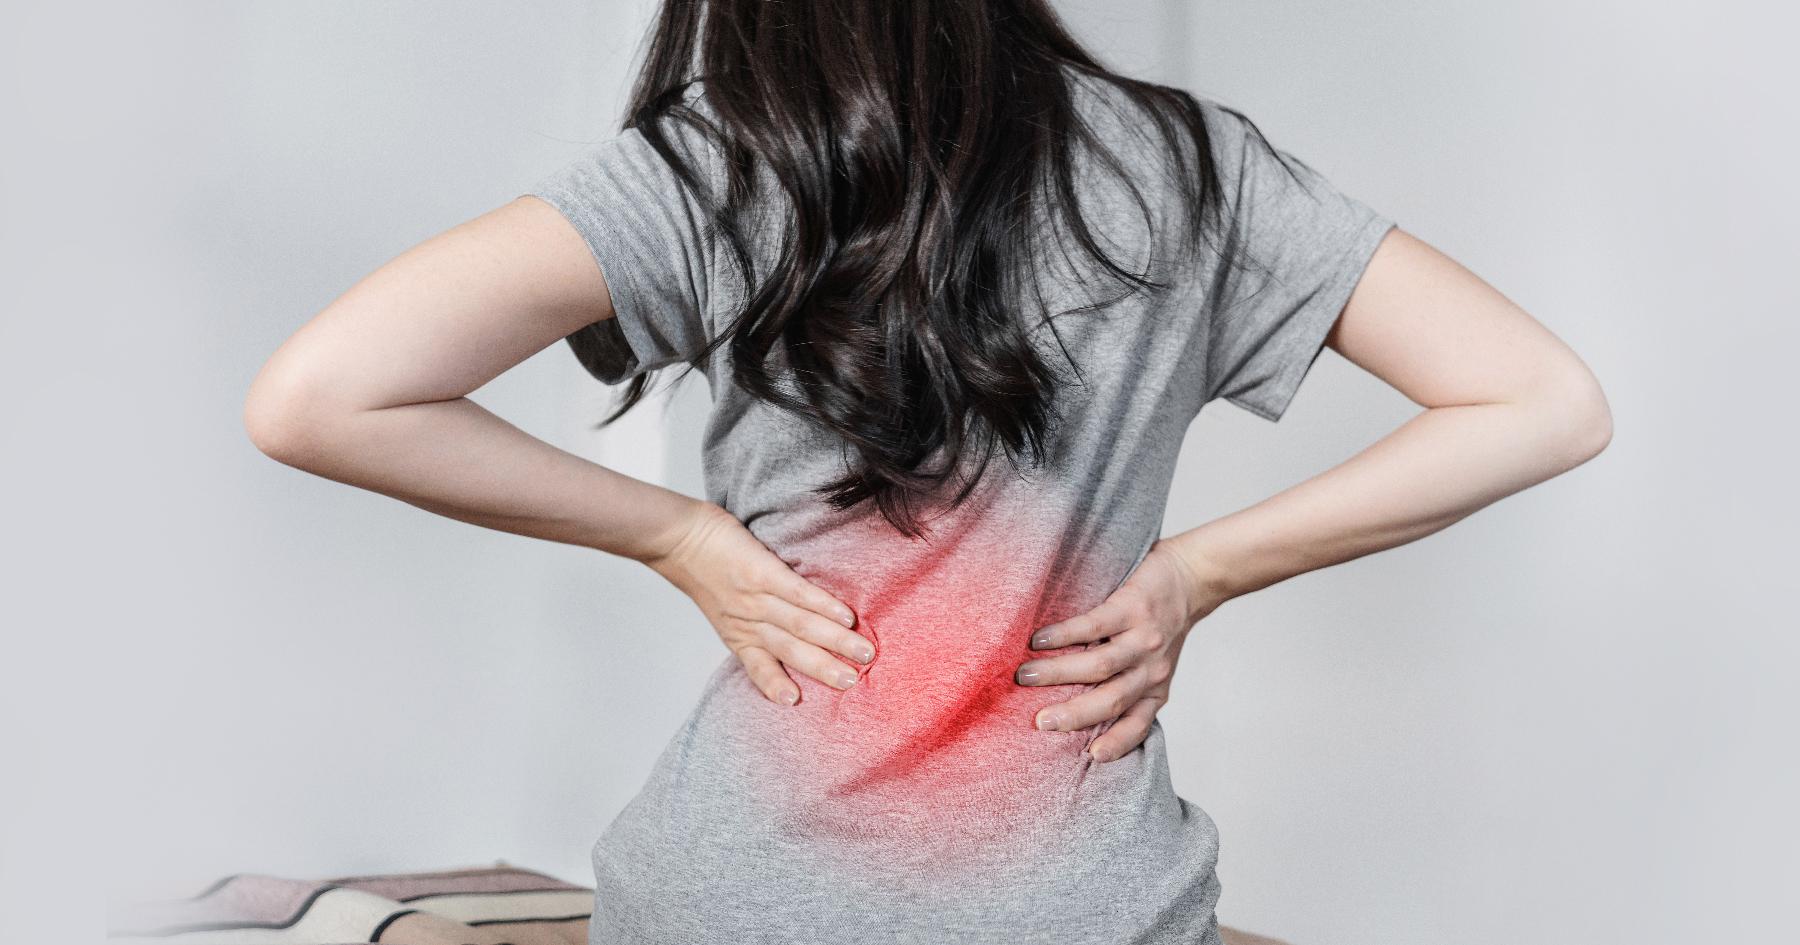 CAUSES OF BACK PAIN WHEN WAKING UP